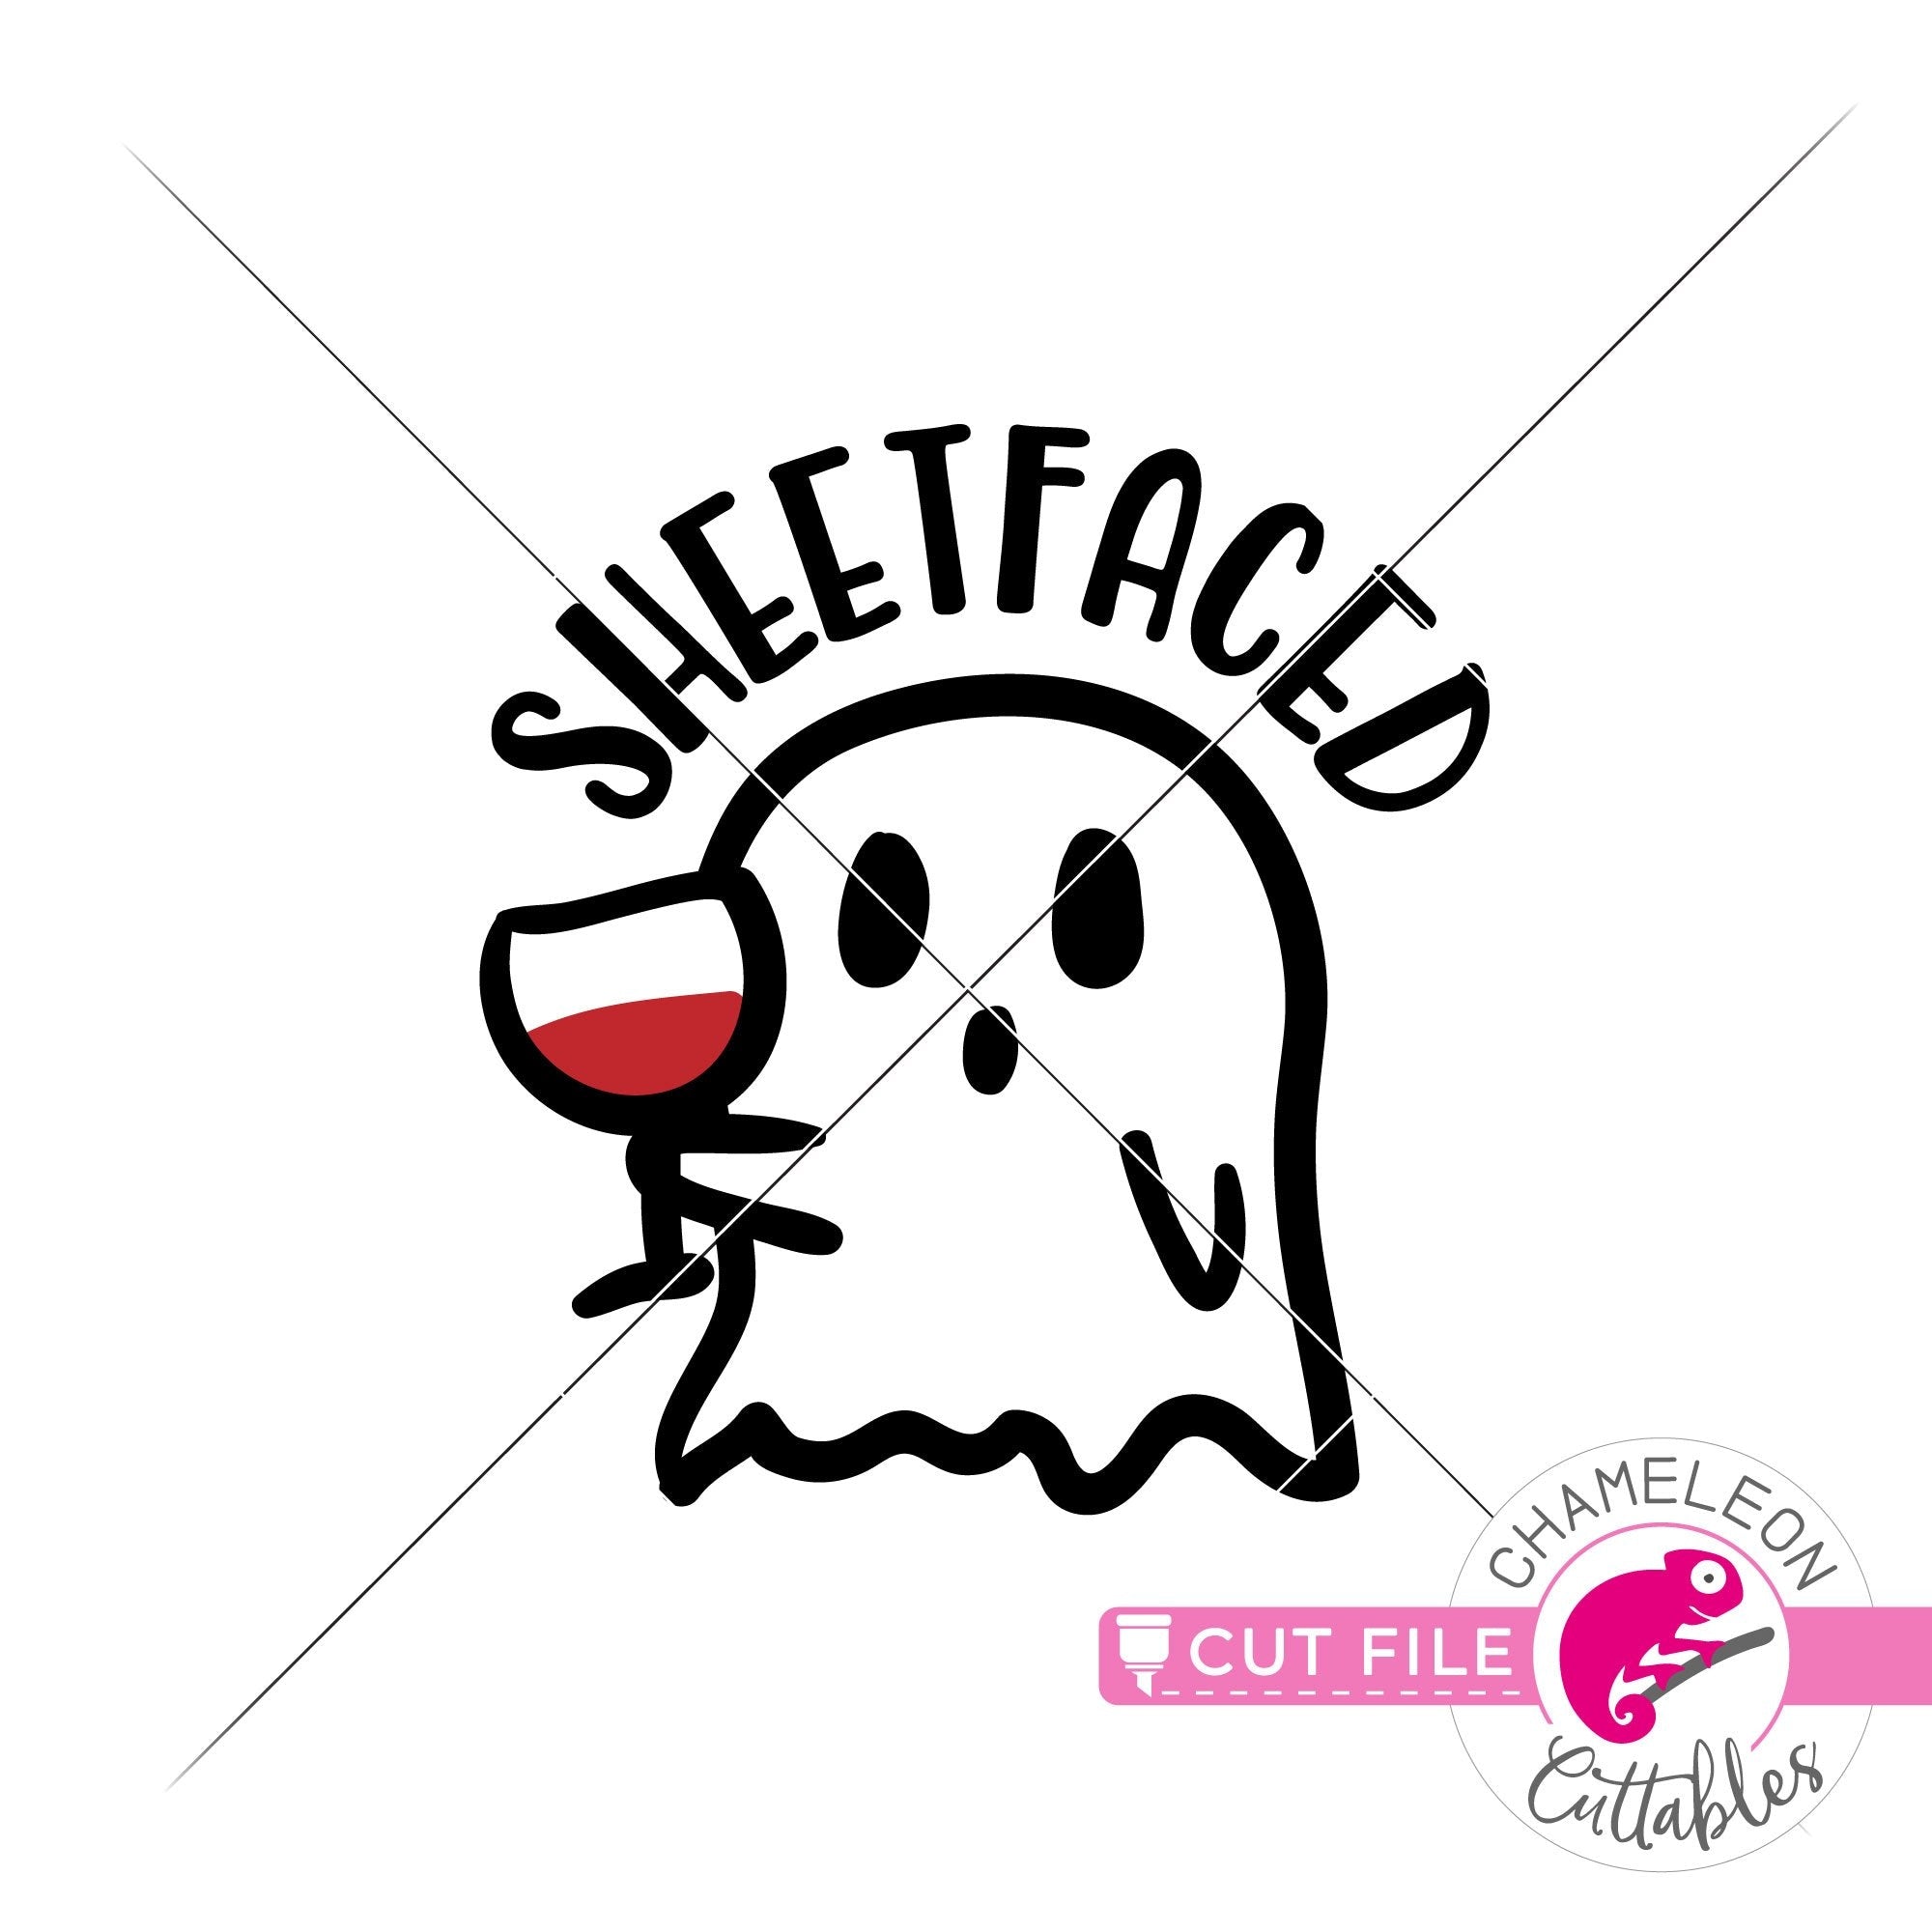 Sheetfaced Halloween Ghost svg png dxf eps jpeg Chameleon Cuttables LLC ...